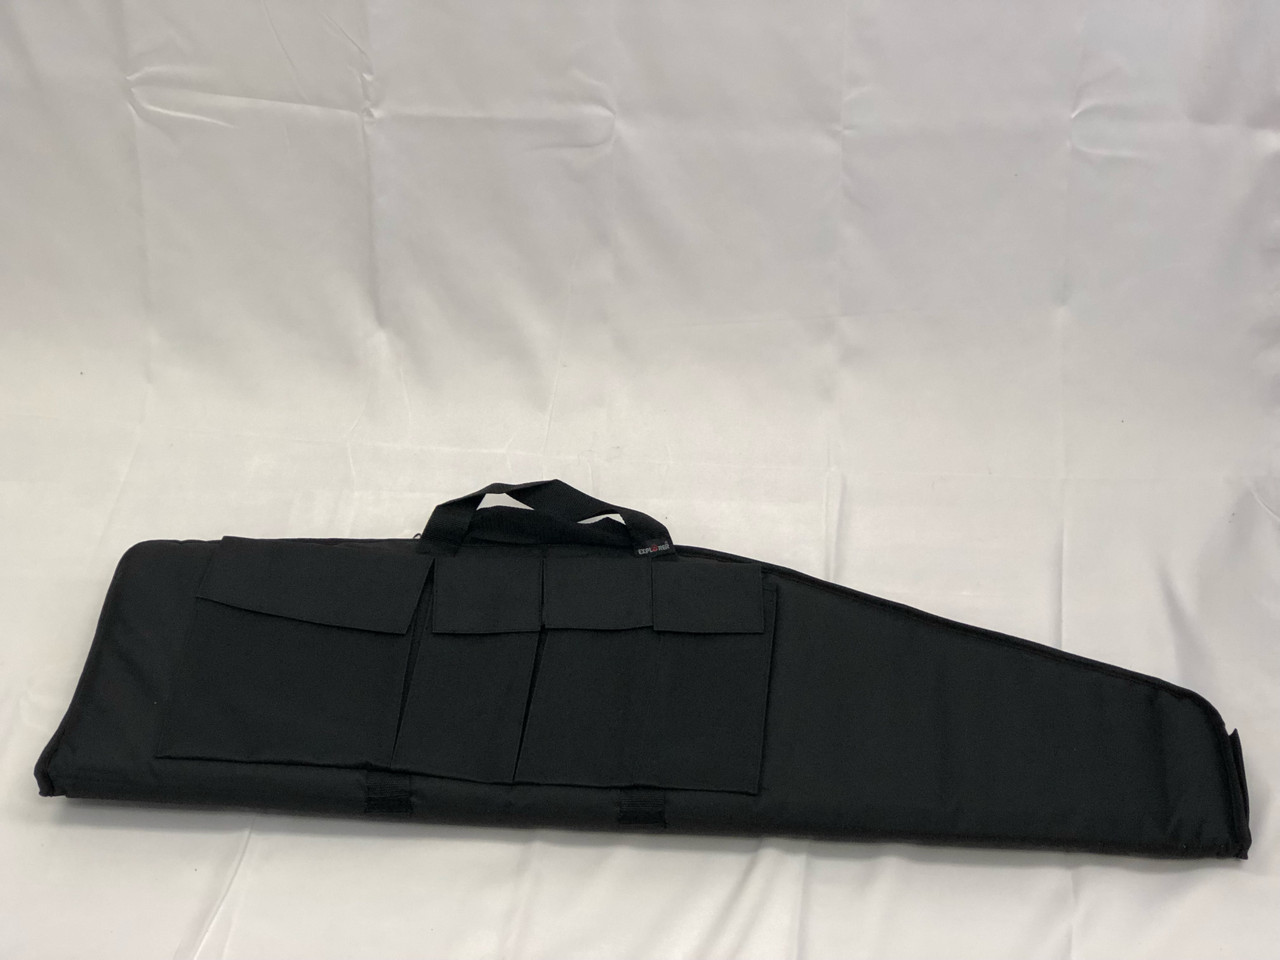 Explorer Heavy Duty Padded Hunting Rifle Case (40 Inches)